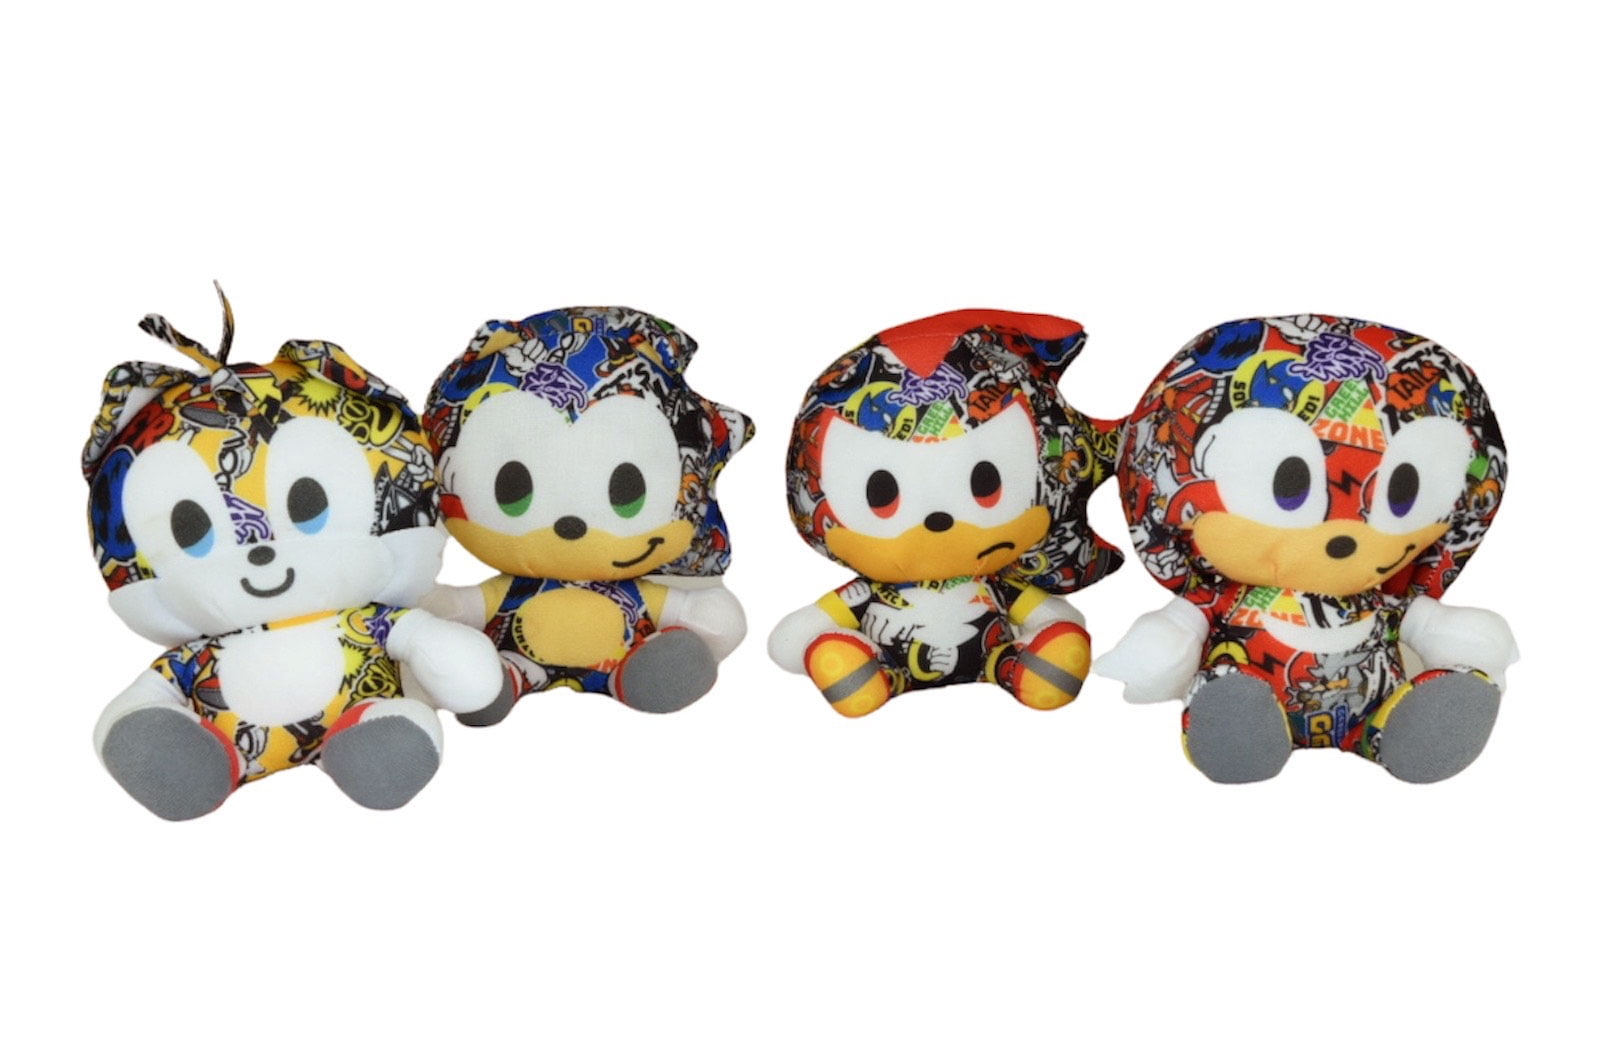 Sonic the Hedgehog 7 Inch Sonic, Shadow, Knuckles and Tails Stuffed Plush  Toy Set of 4 